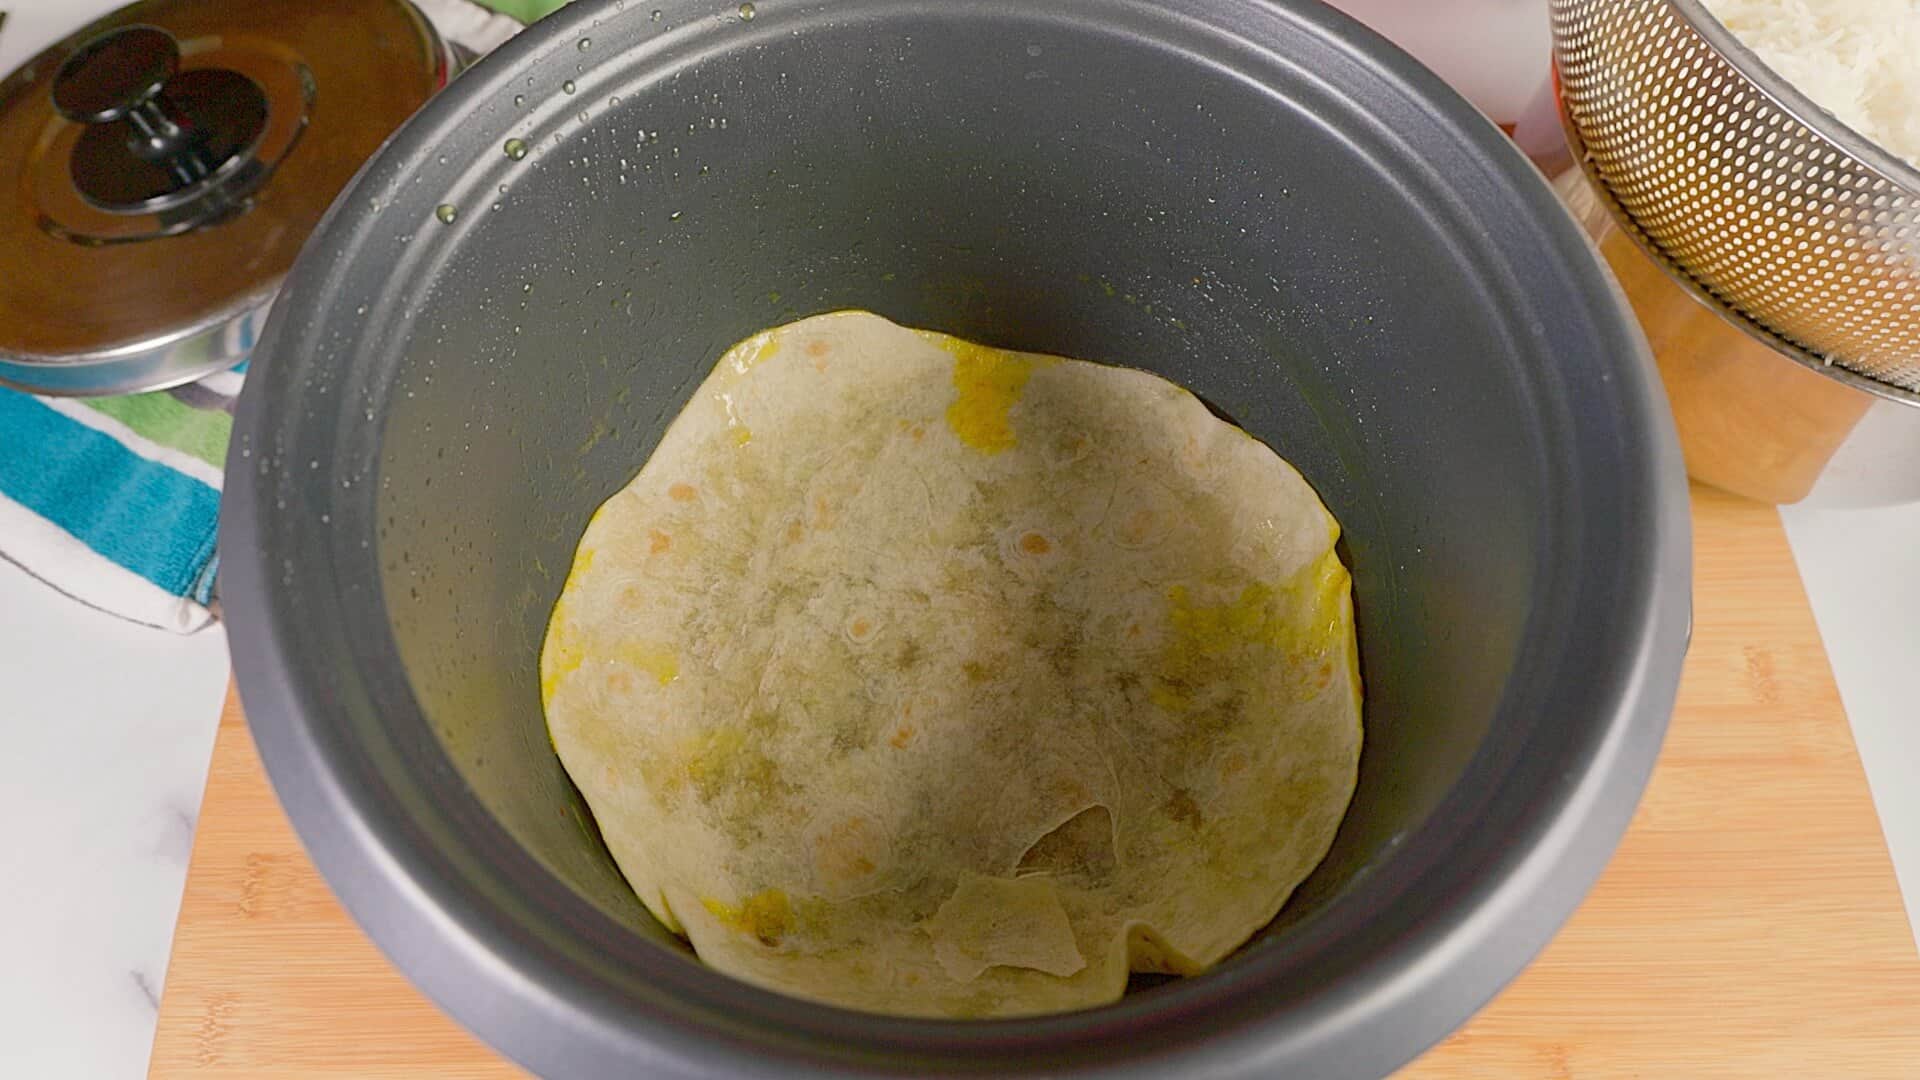 Flatbread placed in the bottom of the pot for making the tahdig.